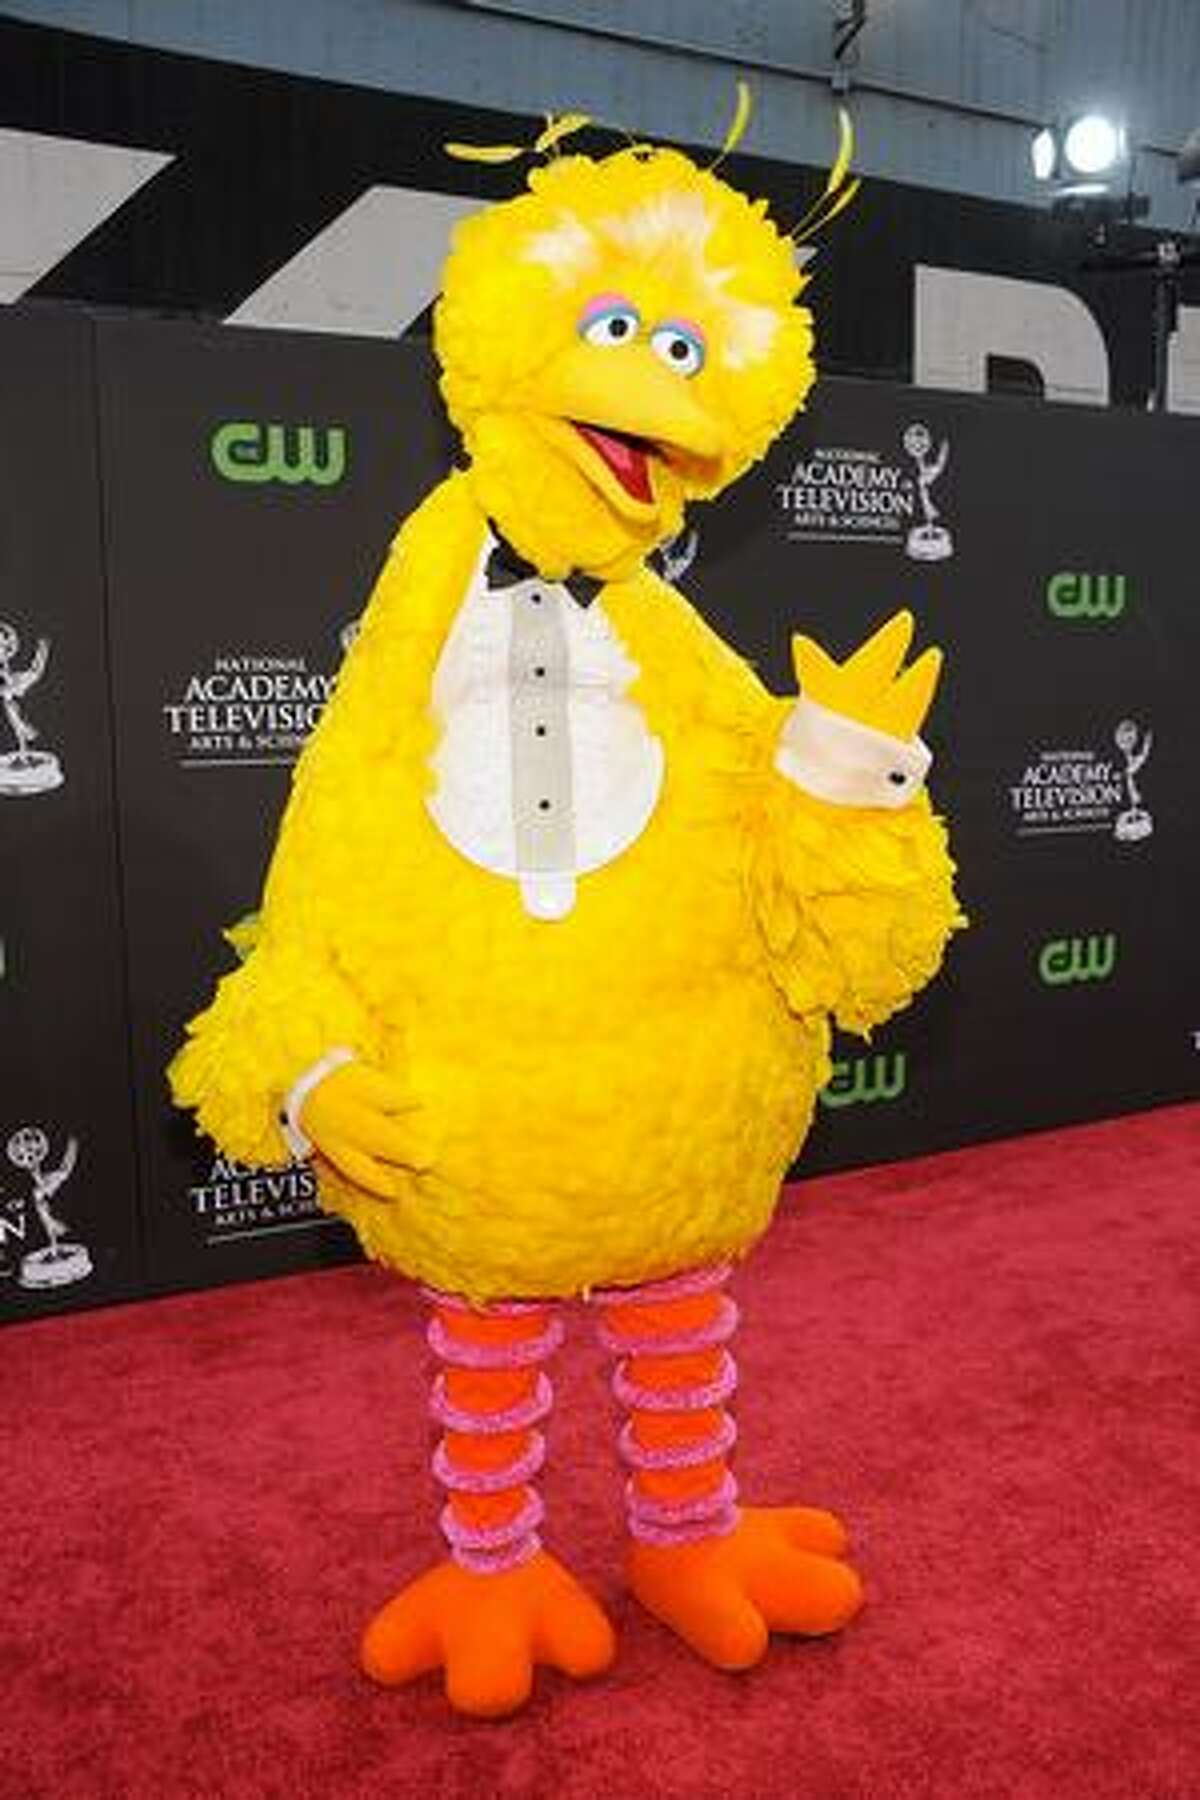 Big Bird arrives at the 36th Annual Daytime Entertainment Emmy Awards at The Orpheum Theatre on Sunday in Los Angeles, Calif.